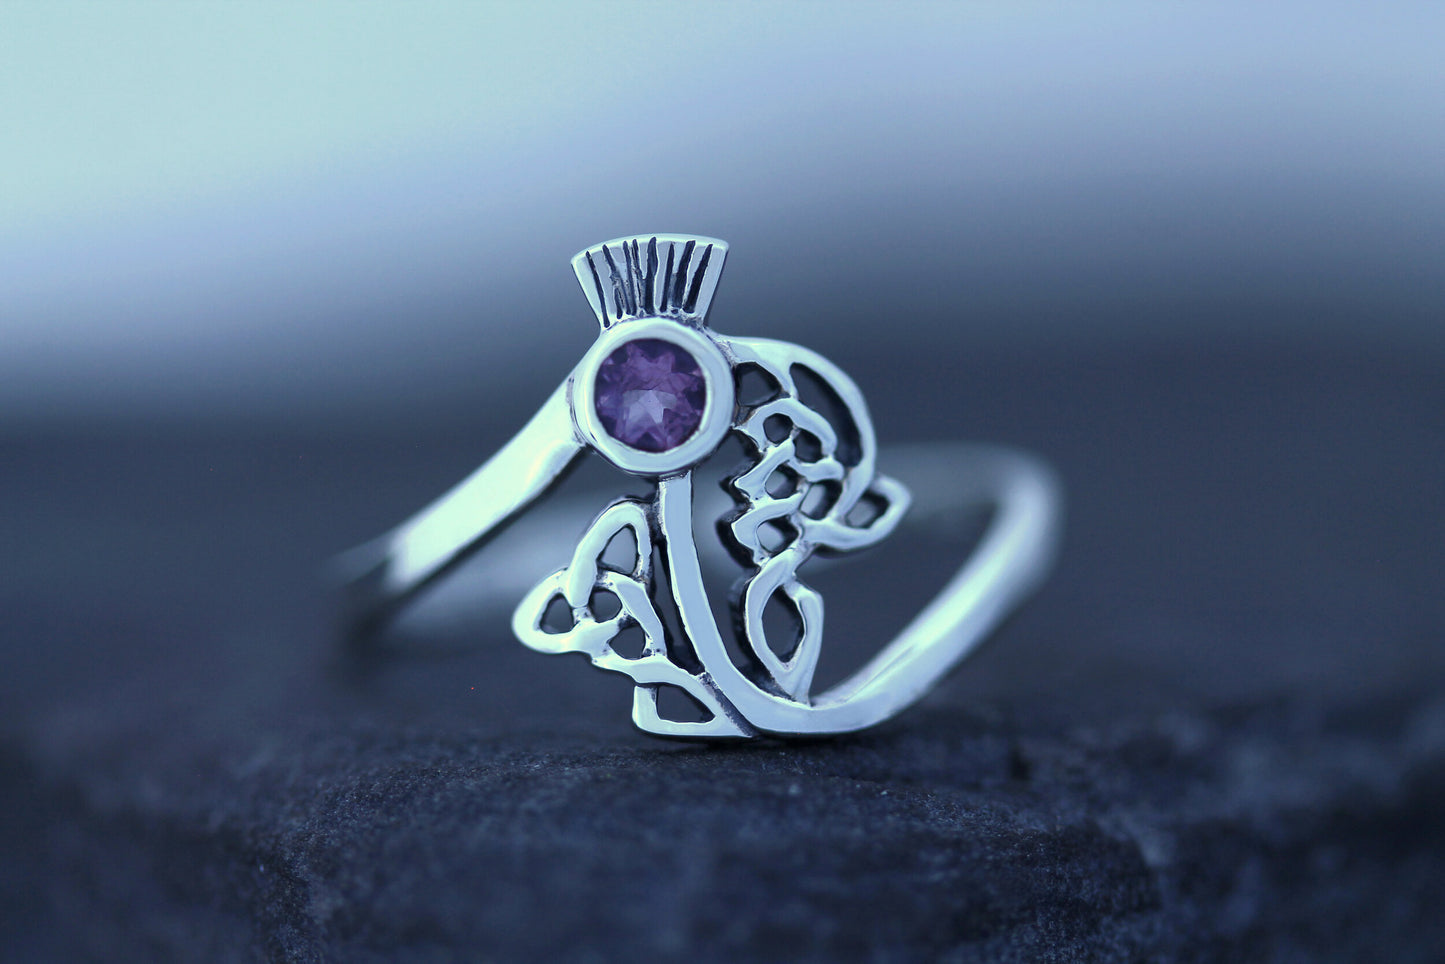 Scottish Thistle Ring - Celtic Woven Leaf with Cut Amethyst